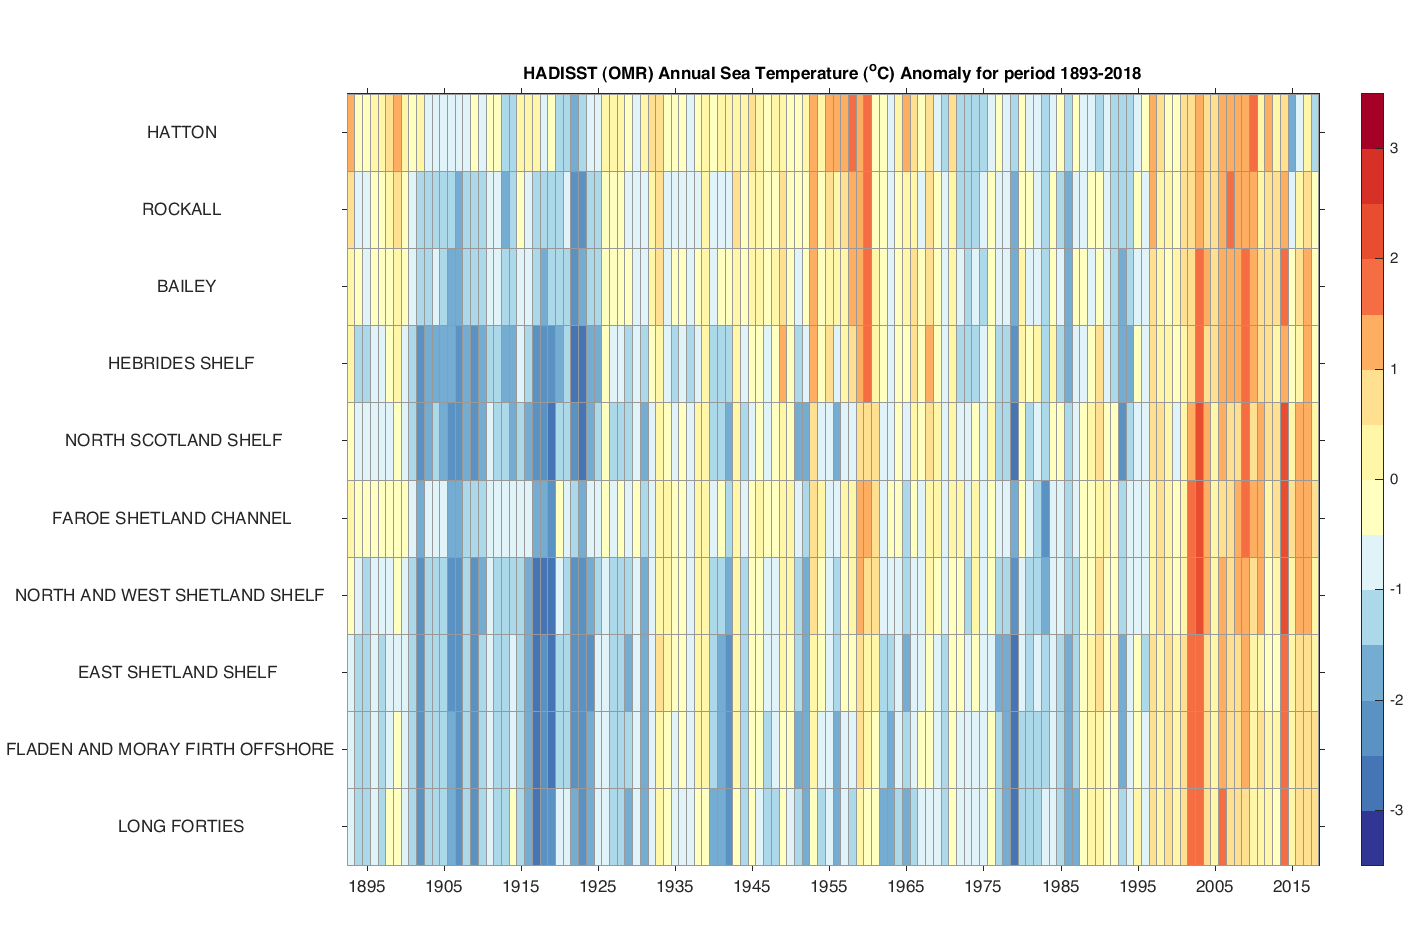 Annual SST anomalies relative to the 1981-2010 period by OMR. from the HadISST 1.1 data product